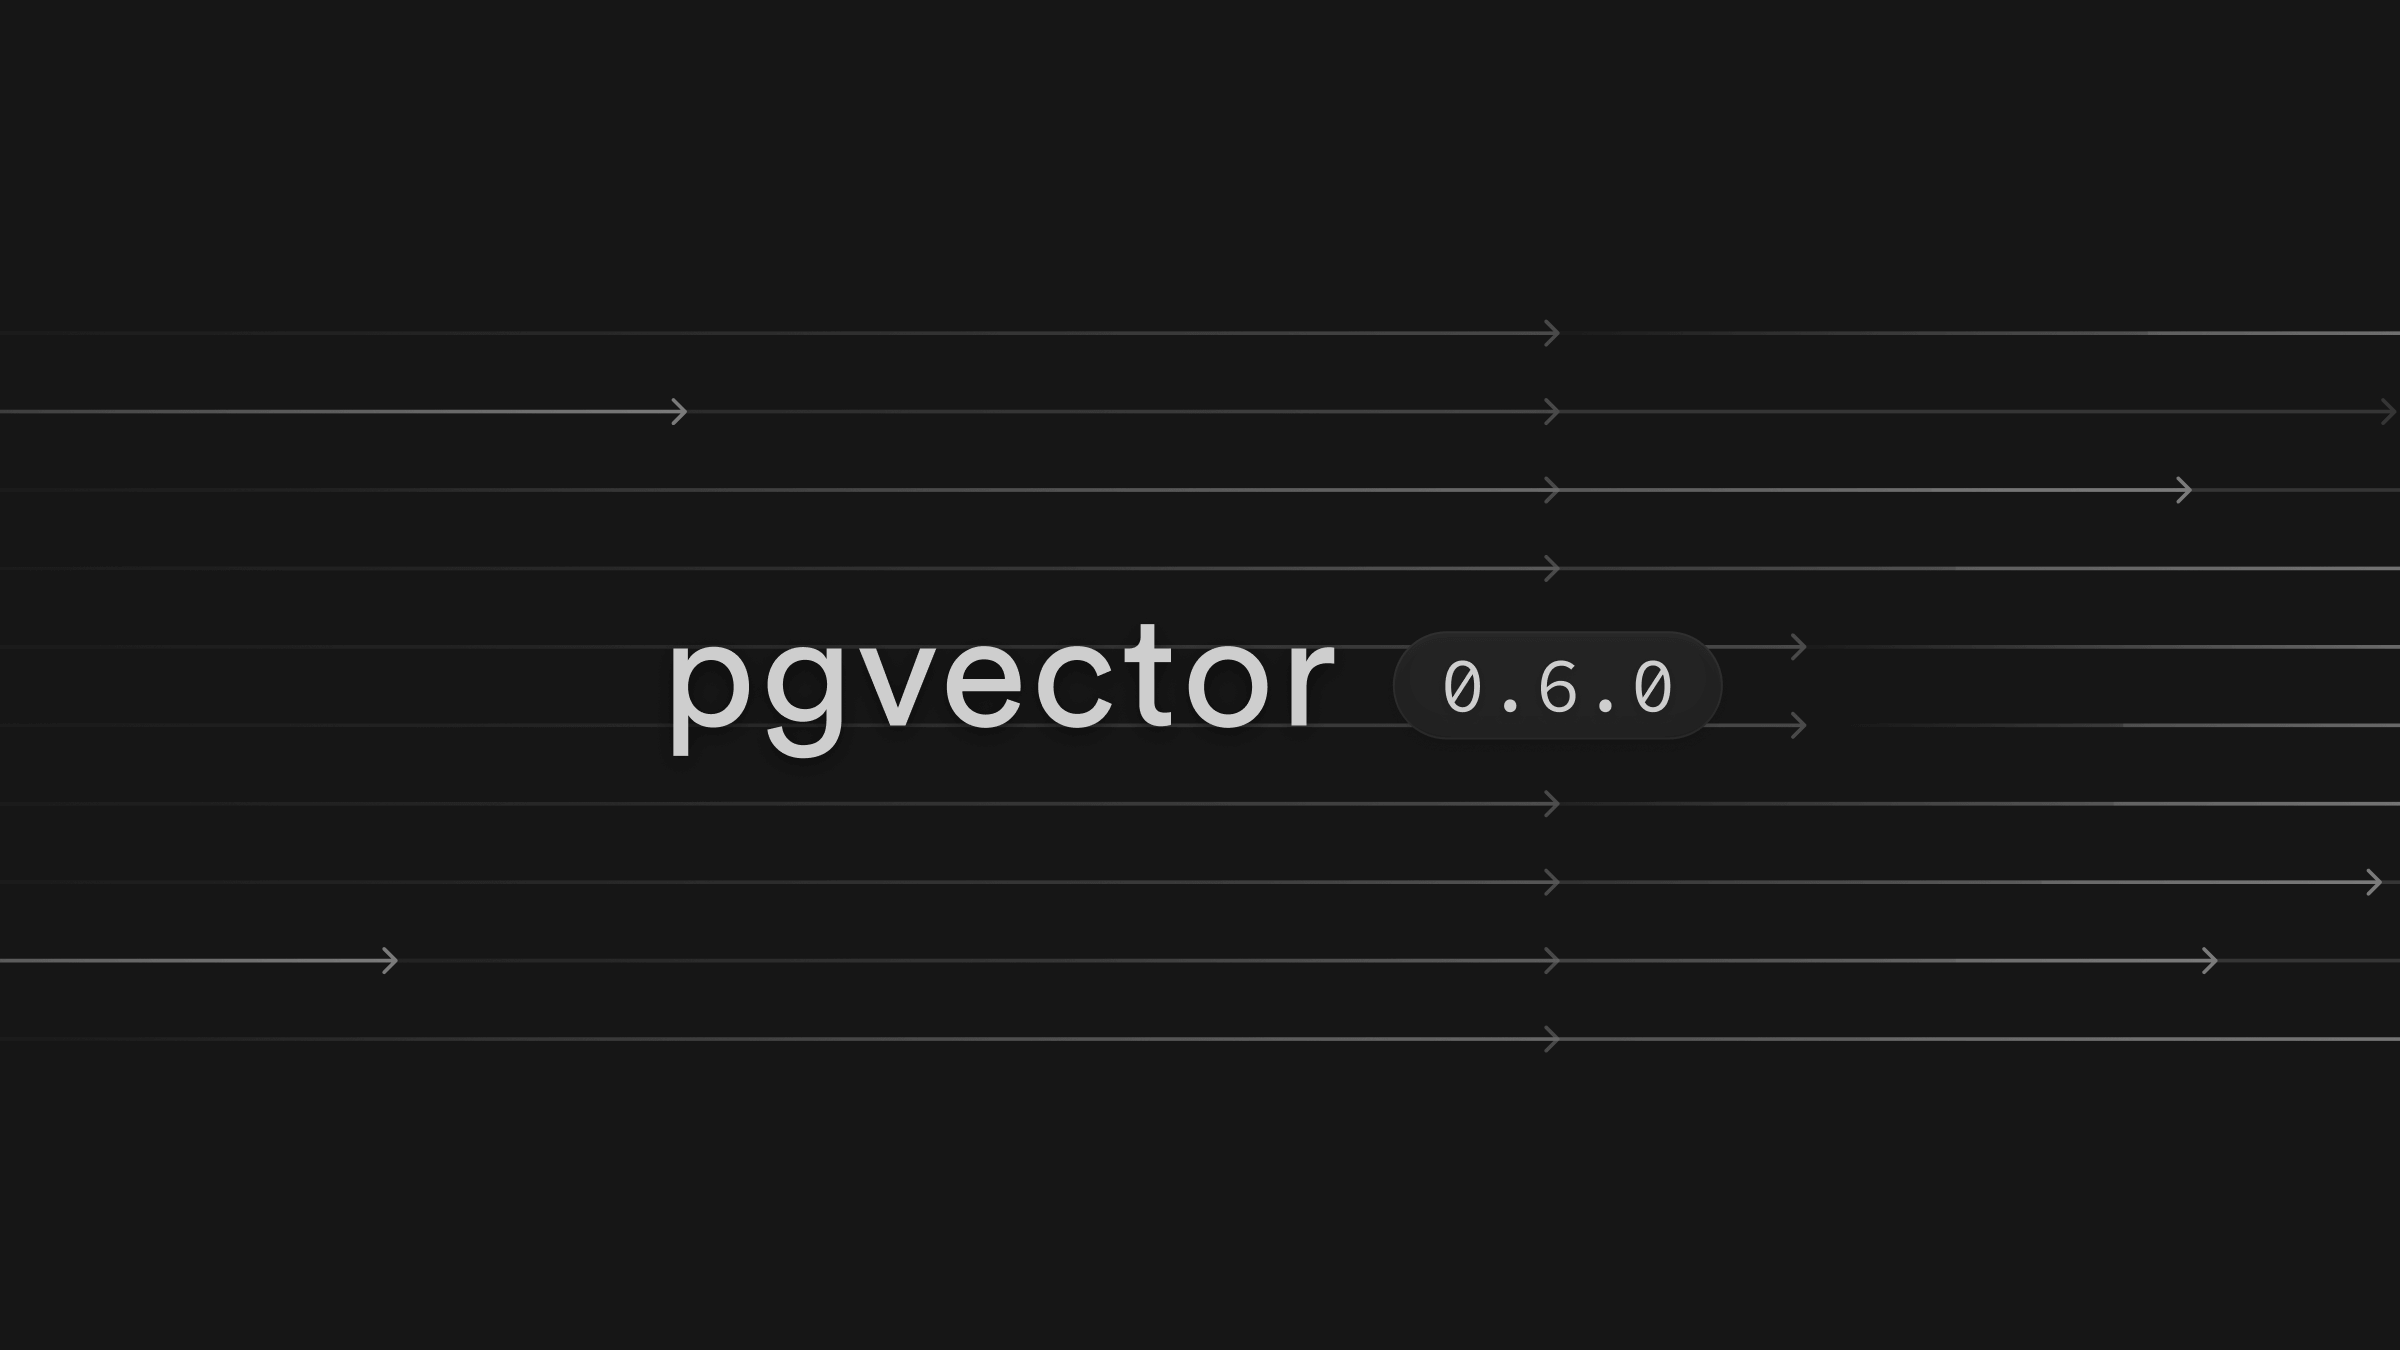 pgvector 0.6.0: 30x faster with parallel index builds thumbnail